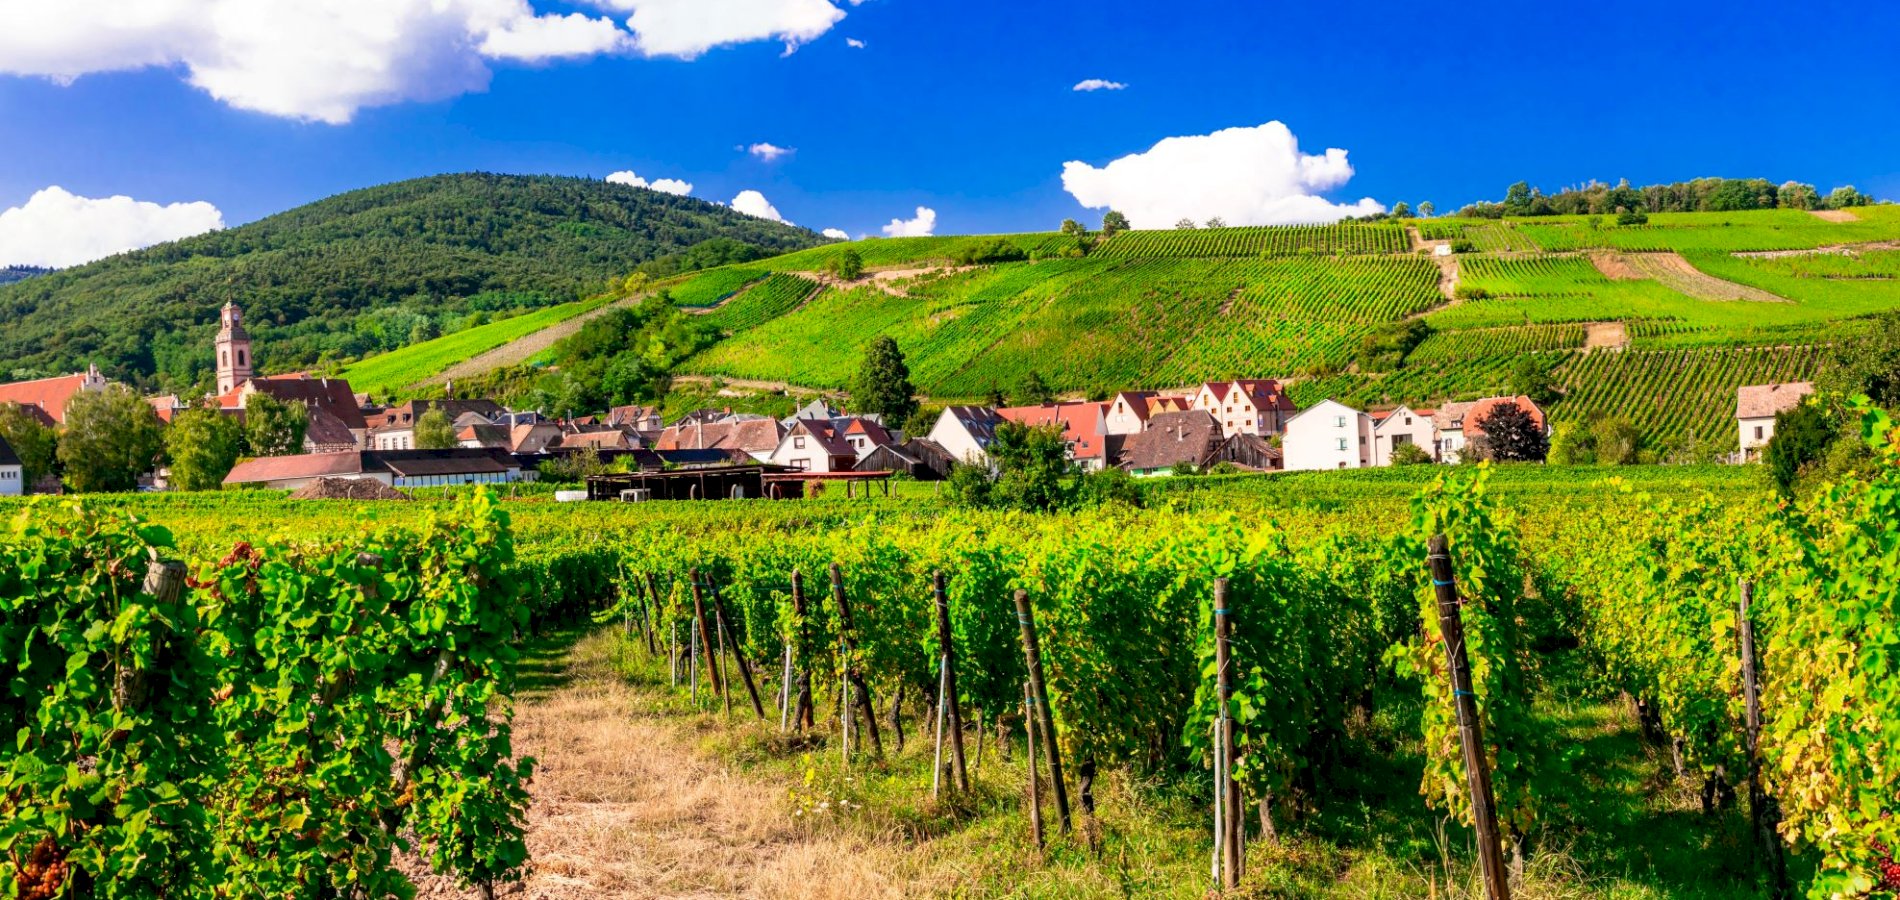 Ophorus Tours - 4 Days Alsace Shared Travel Package - 3* Hotel Option